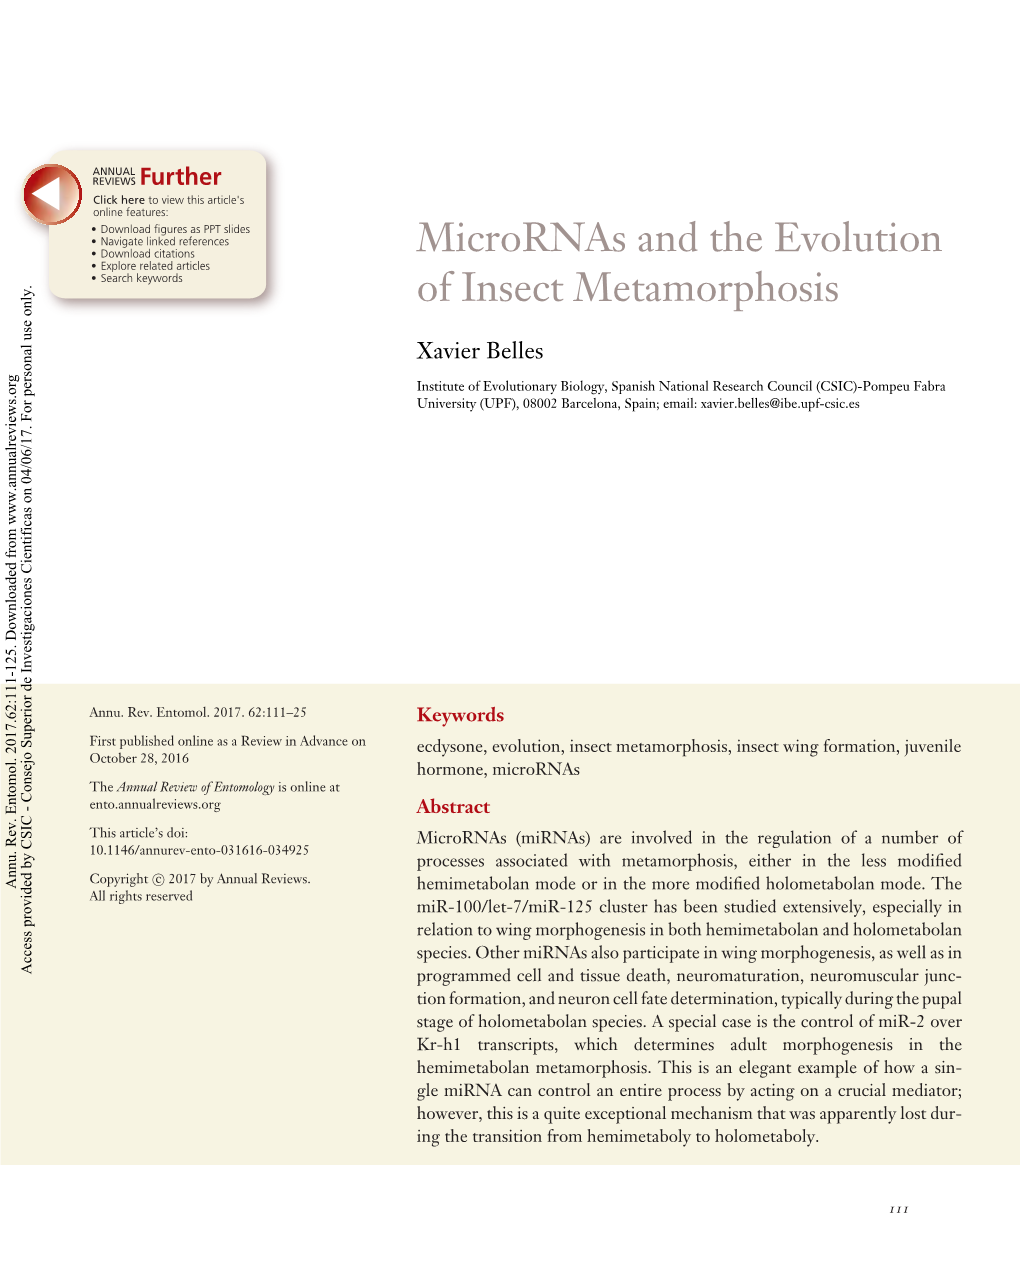 Micrornas and the Evolution of Insect Metamorphosis